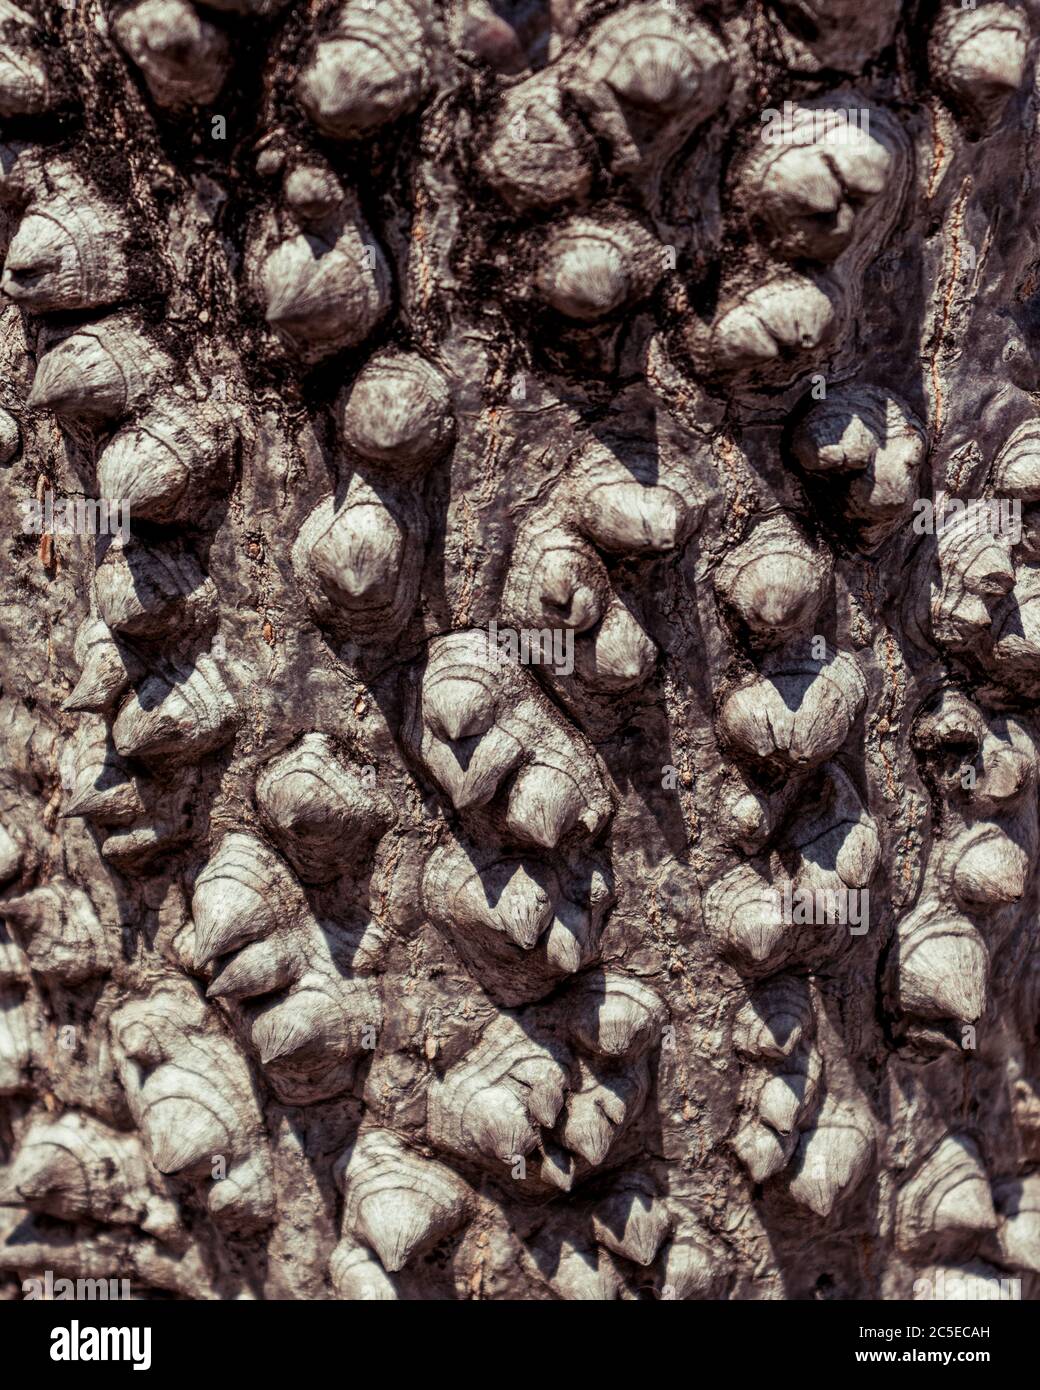 Texture of close up tree trunk bark - perfect for backgrounds or graphic design Stock Photo